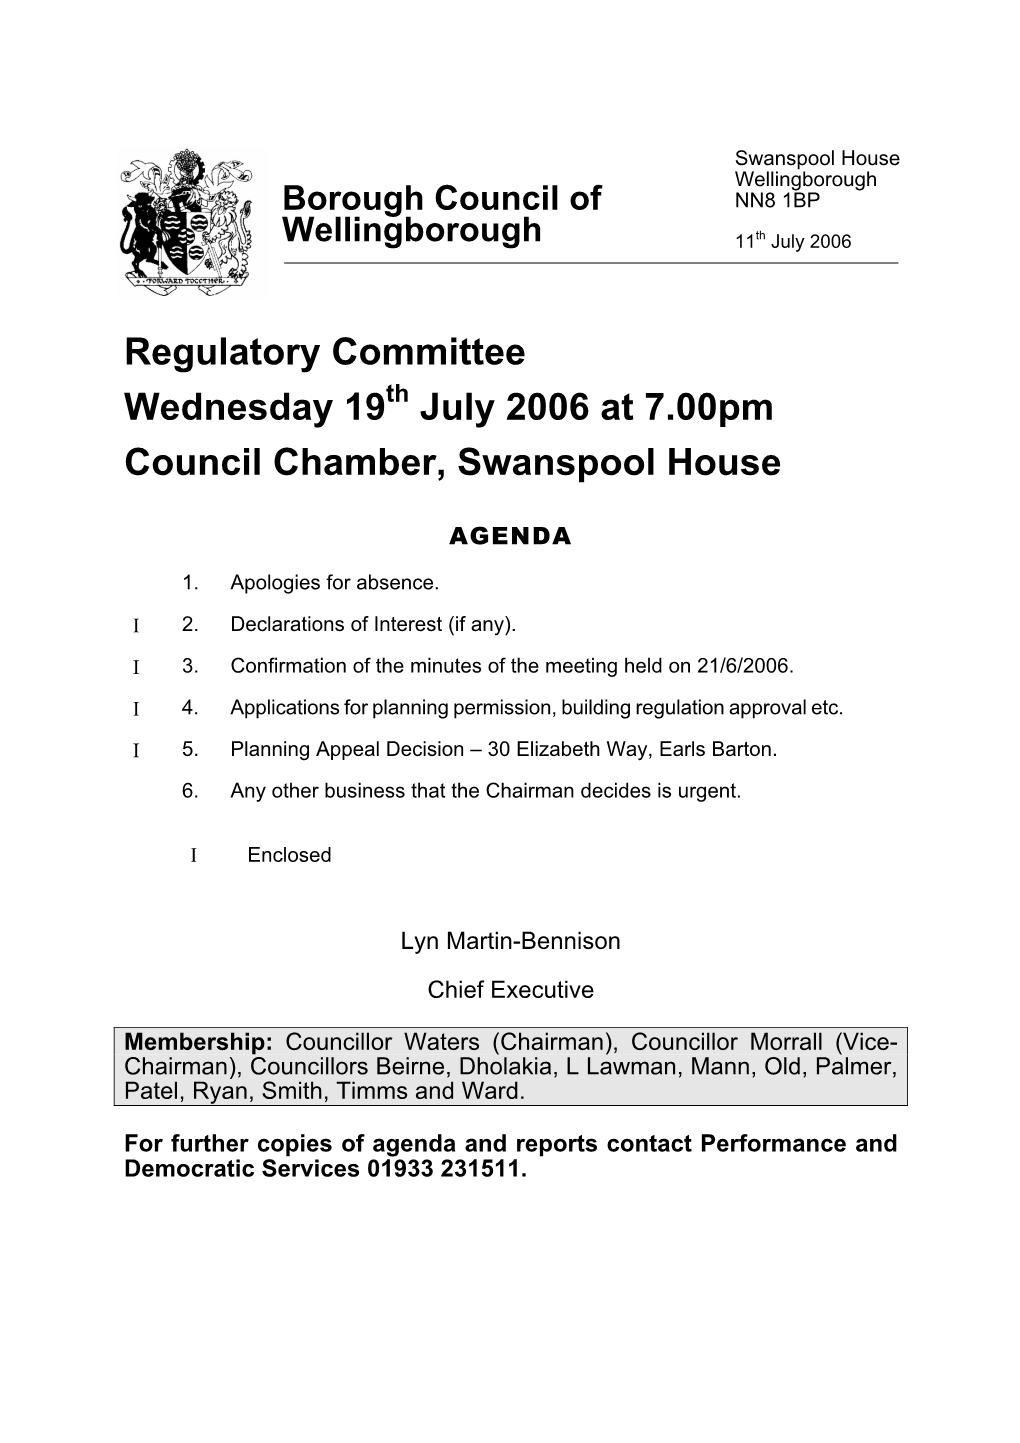 Regulatory Committee Wednesday 19 July 2006 at 7.00Pm Council